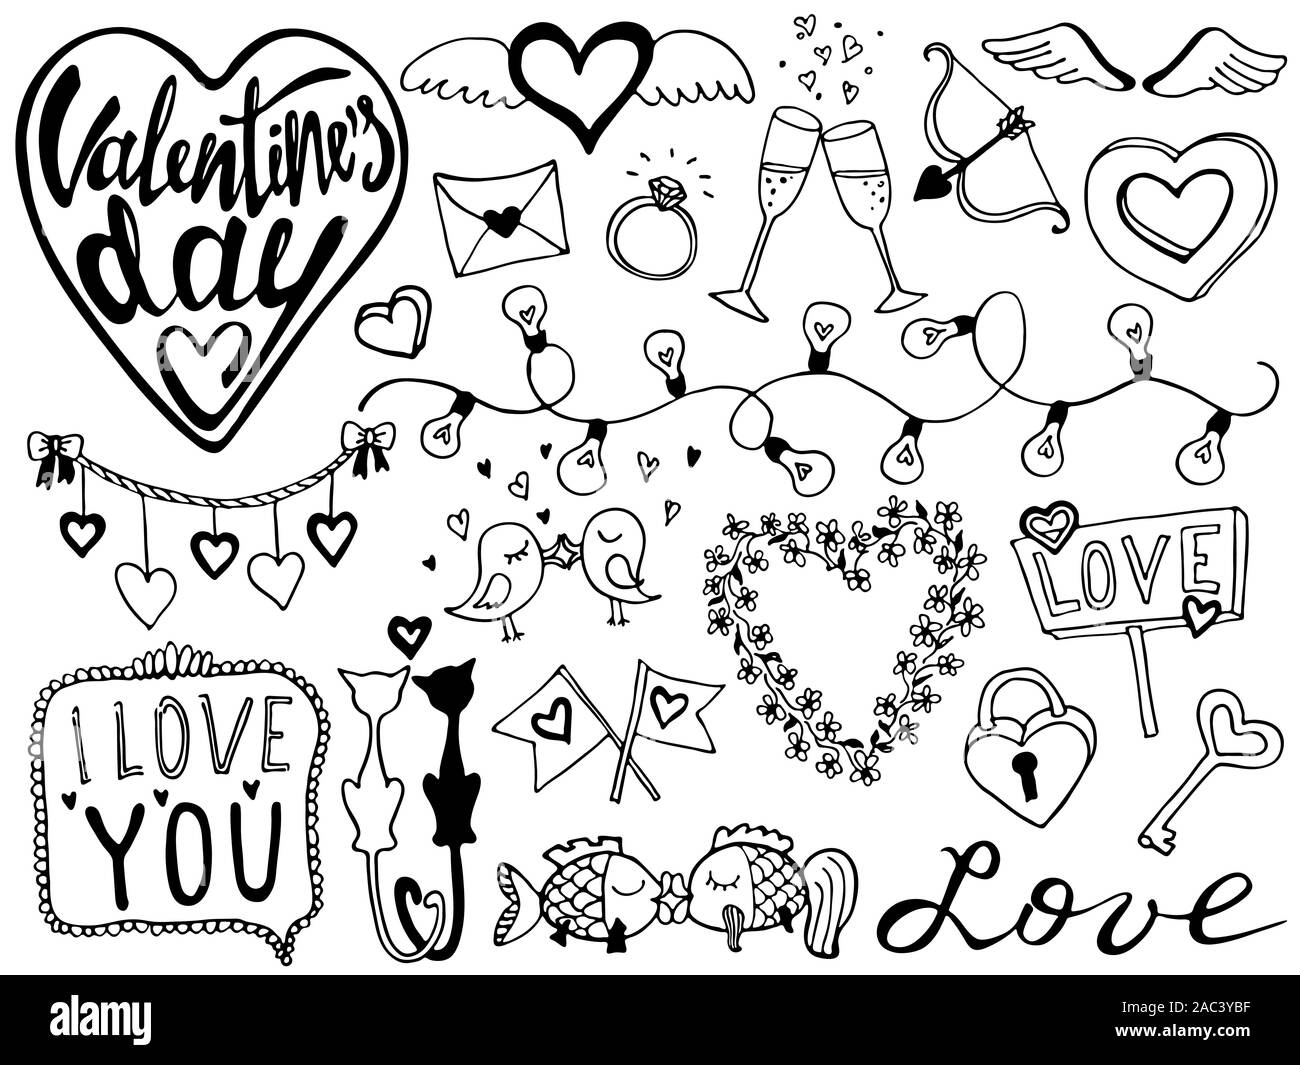 Love couple romantic activity hand drawing. good use for symbol, logo, web  icon, mascot, sign, sticker, or any design you want. Stock Vector